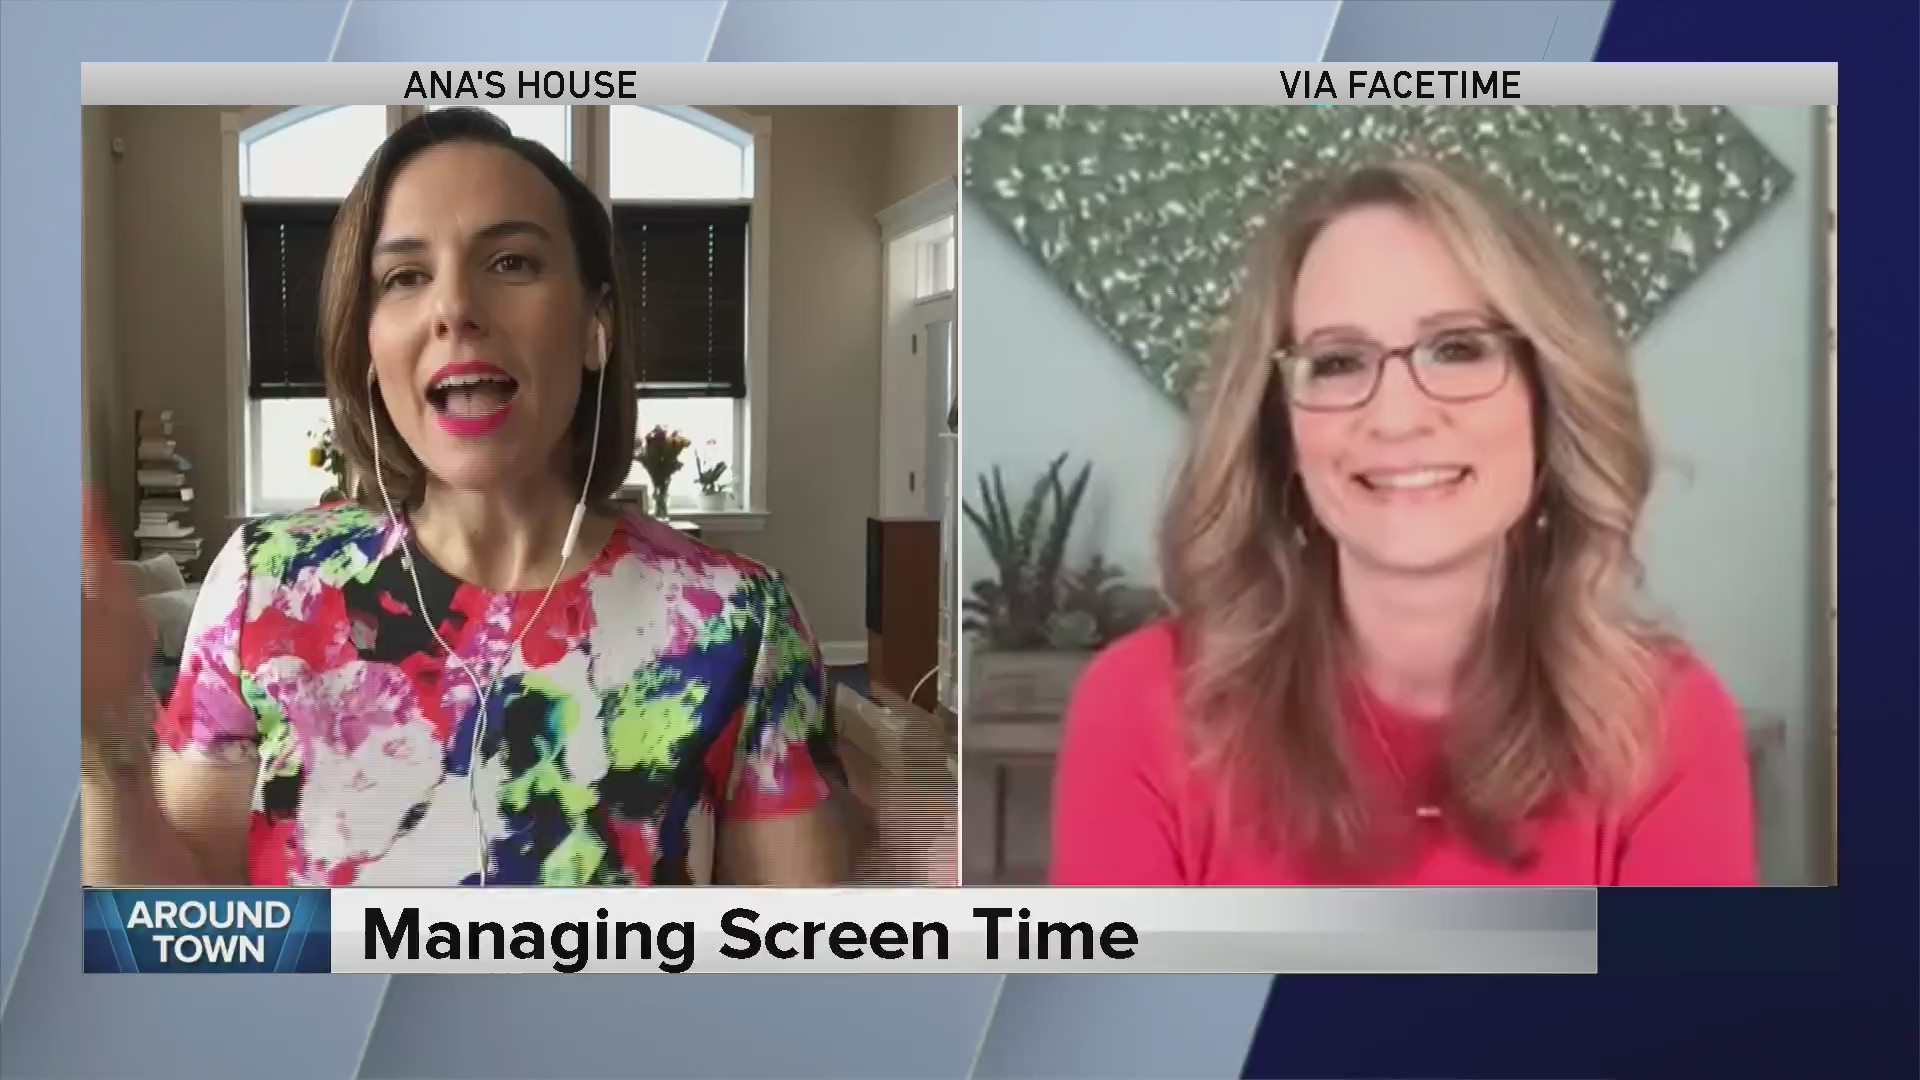 Around ‘The House’ talks with Dr. Nicole Beurkens about keeping kids safe during a digital time